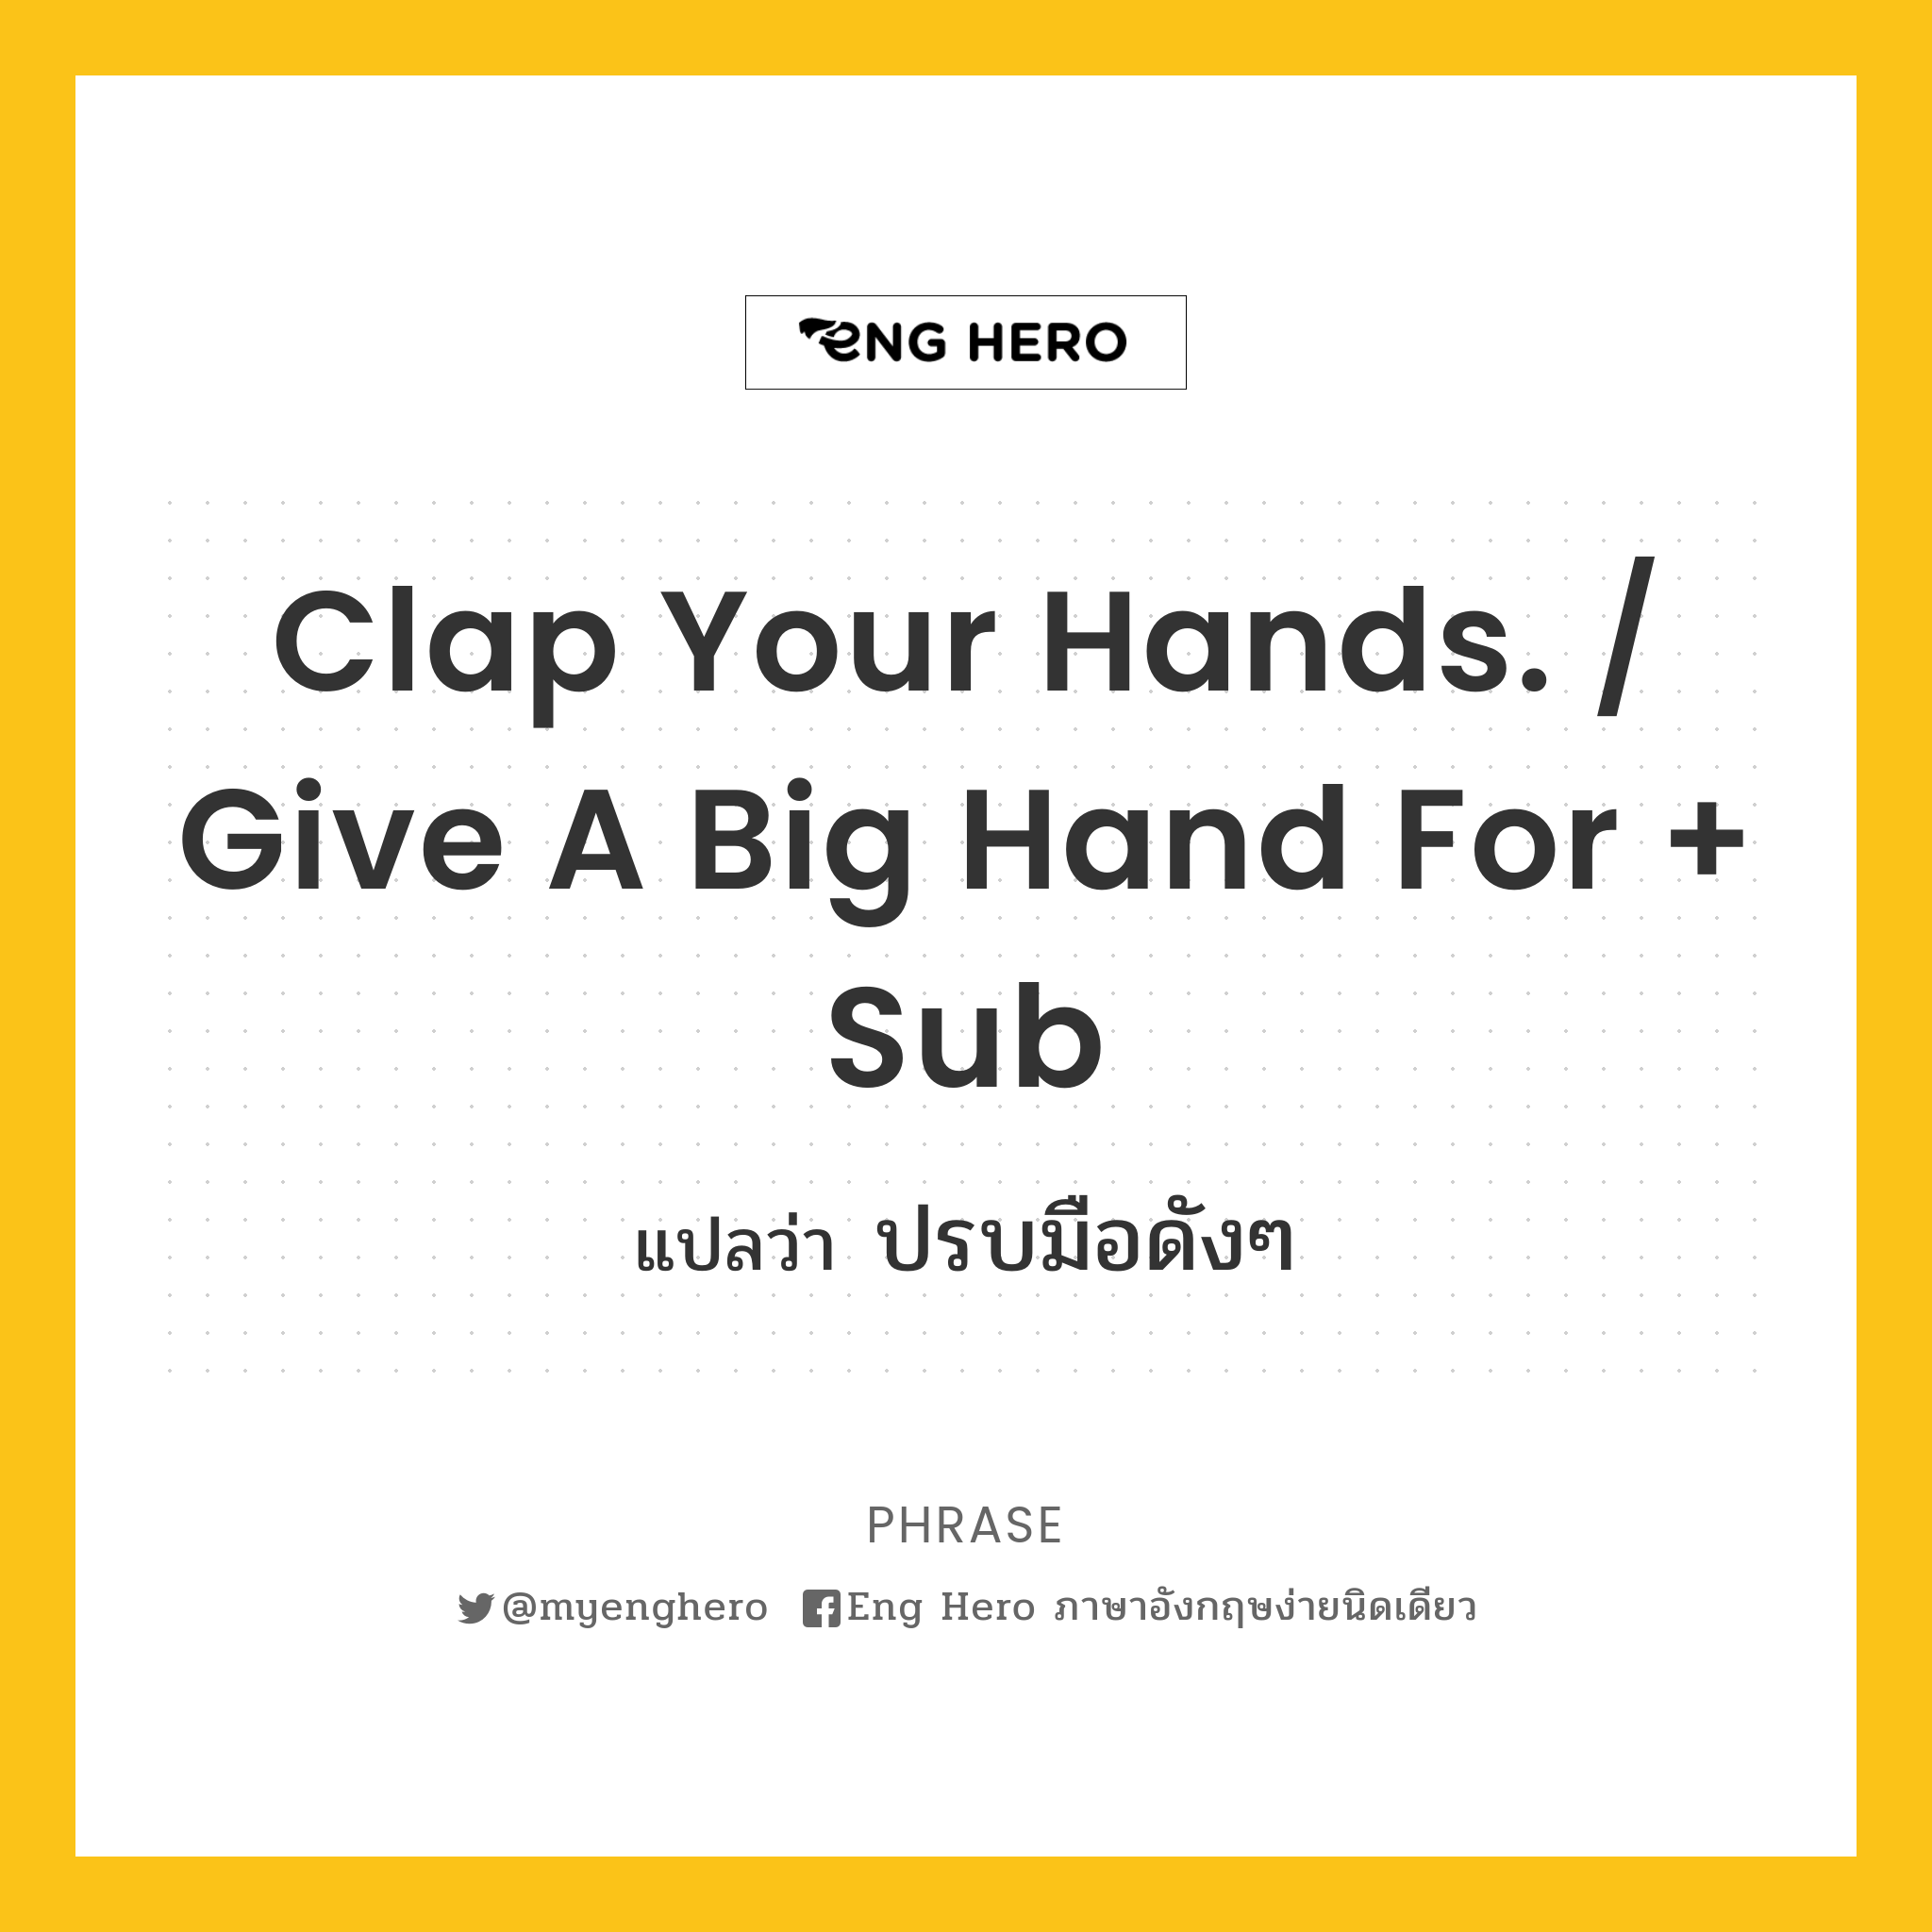 Clap your hands. / Give a big hand for + sub